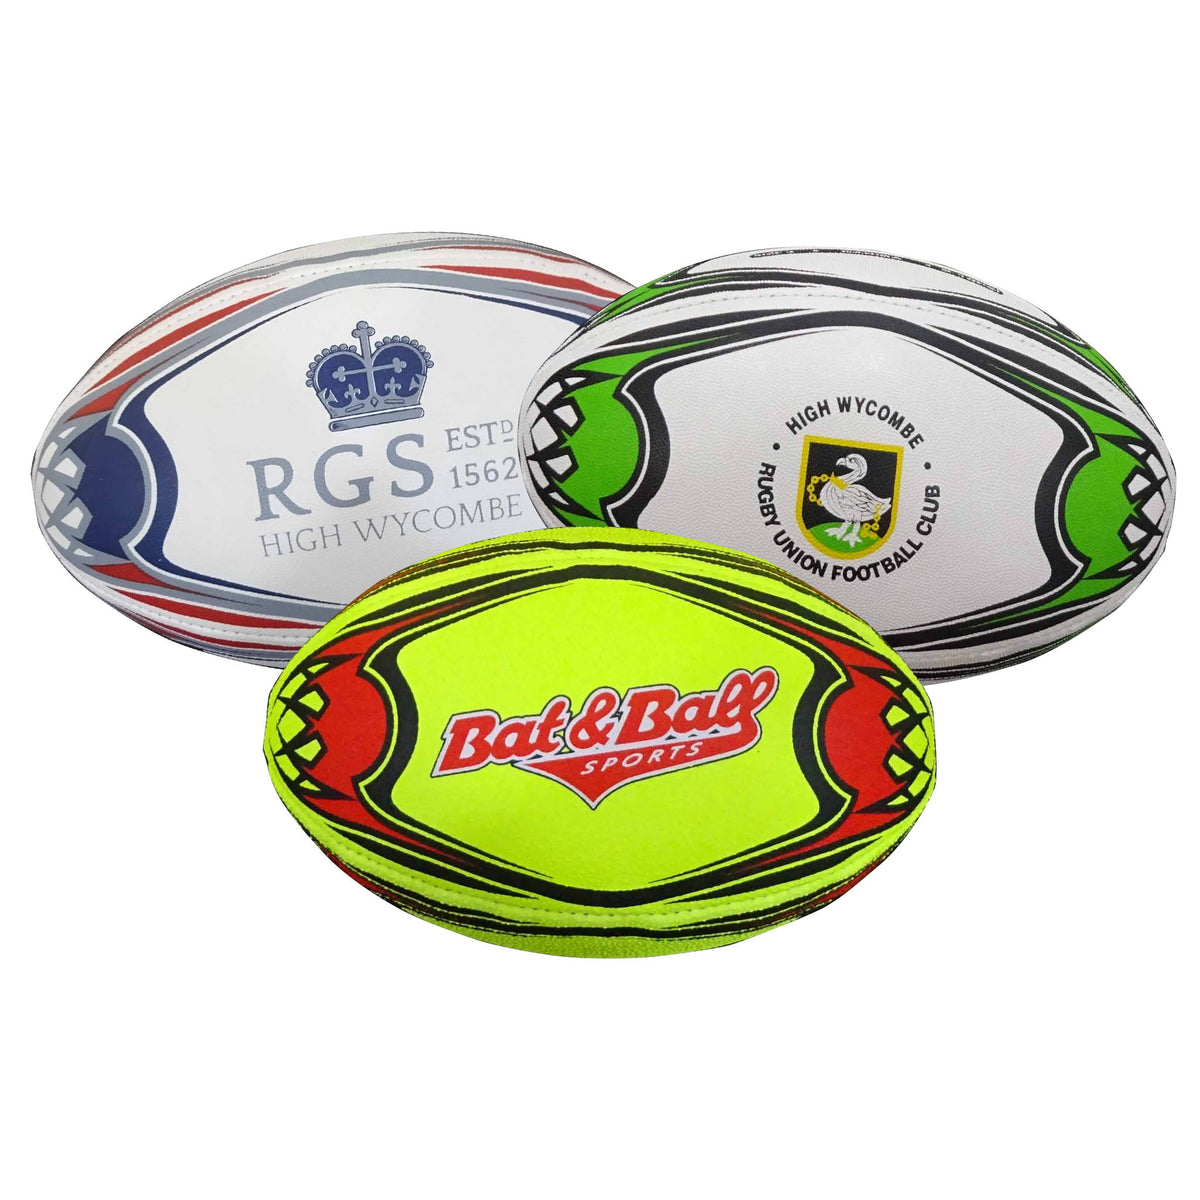 Piranha Custom Rugby Balls: From only (per ball)